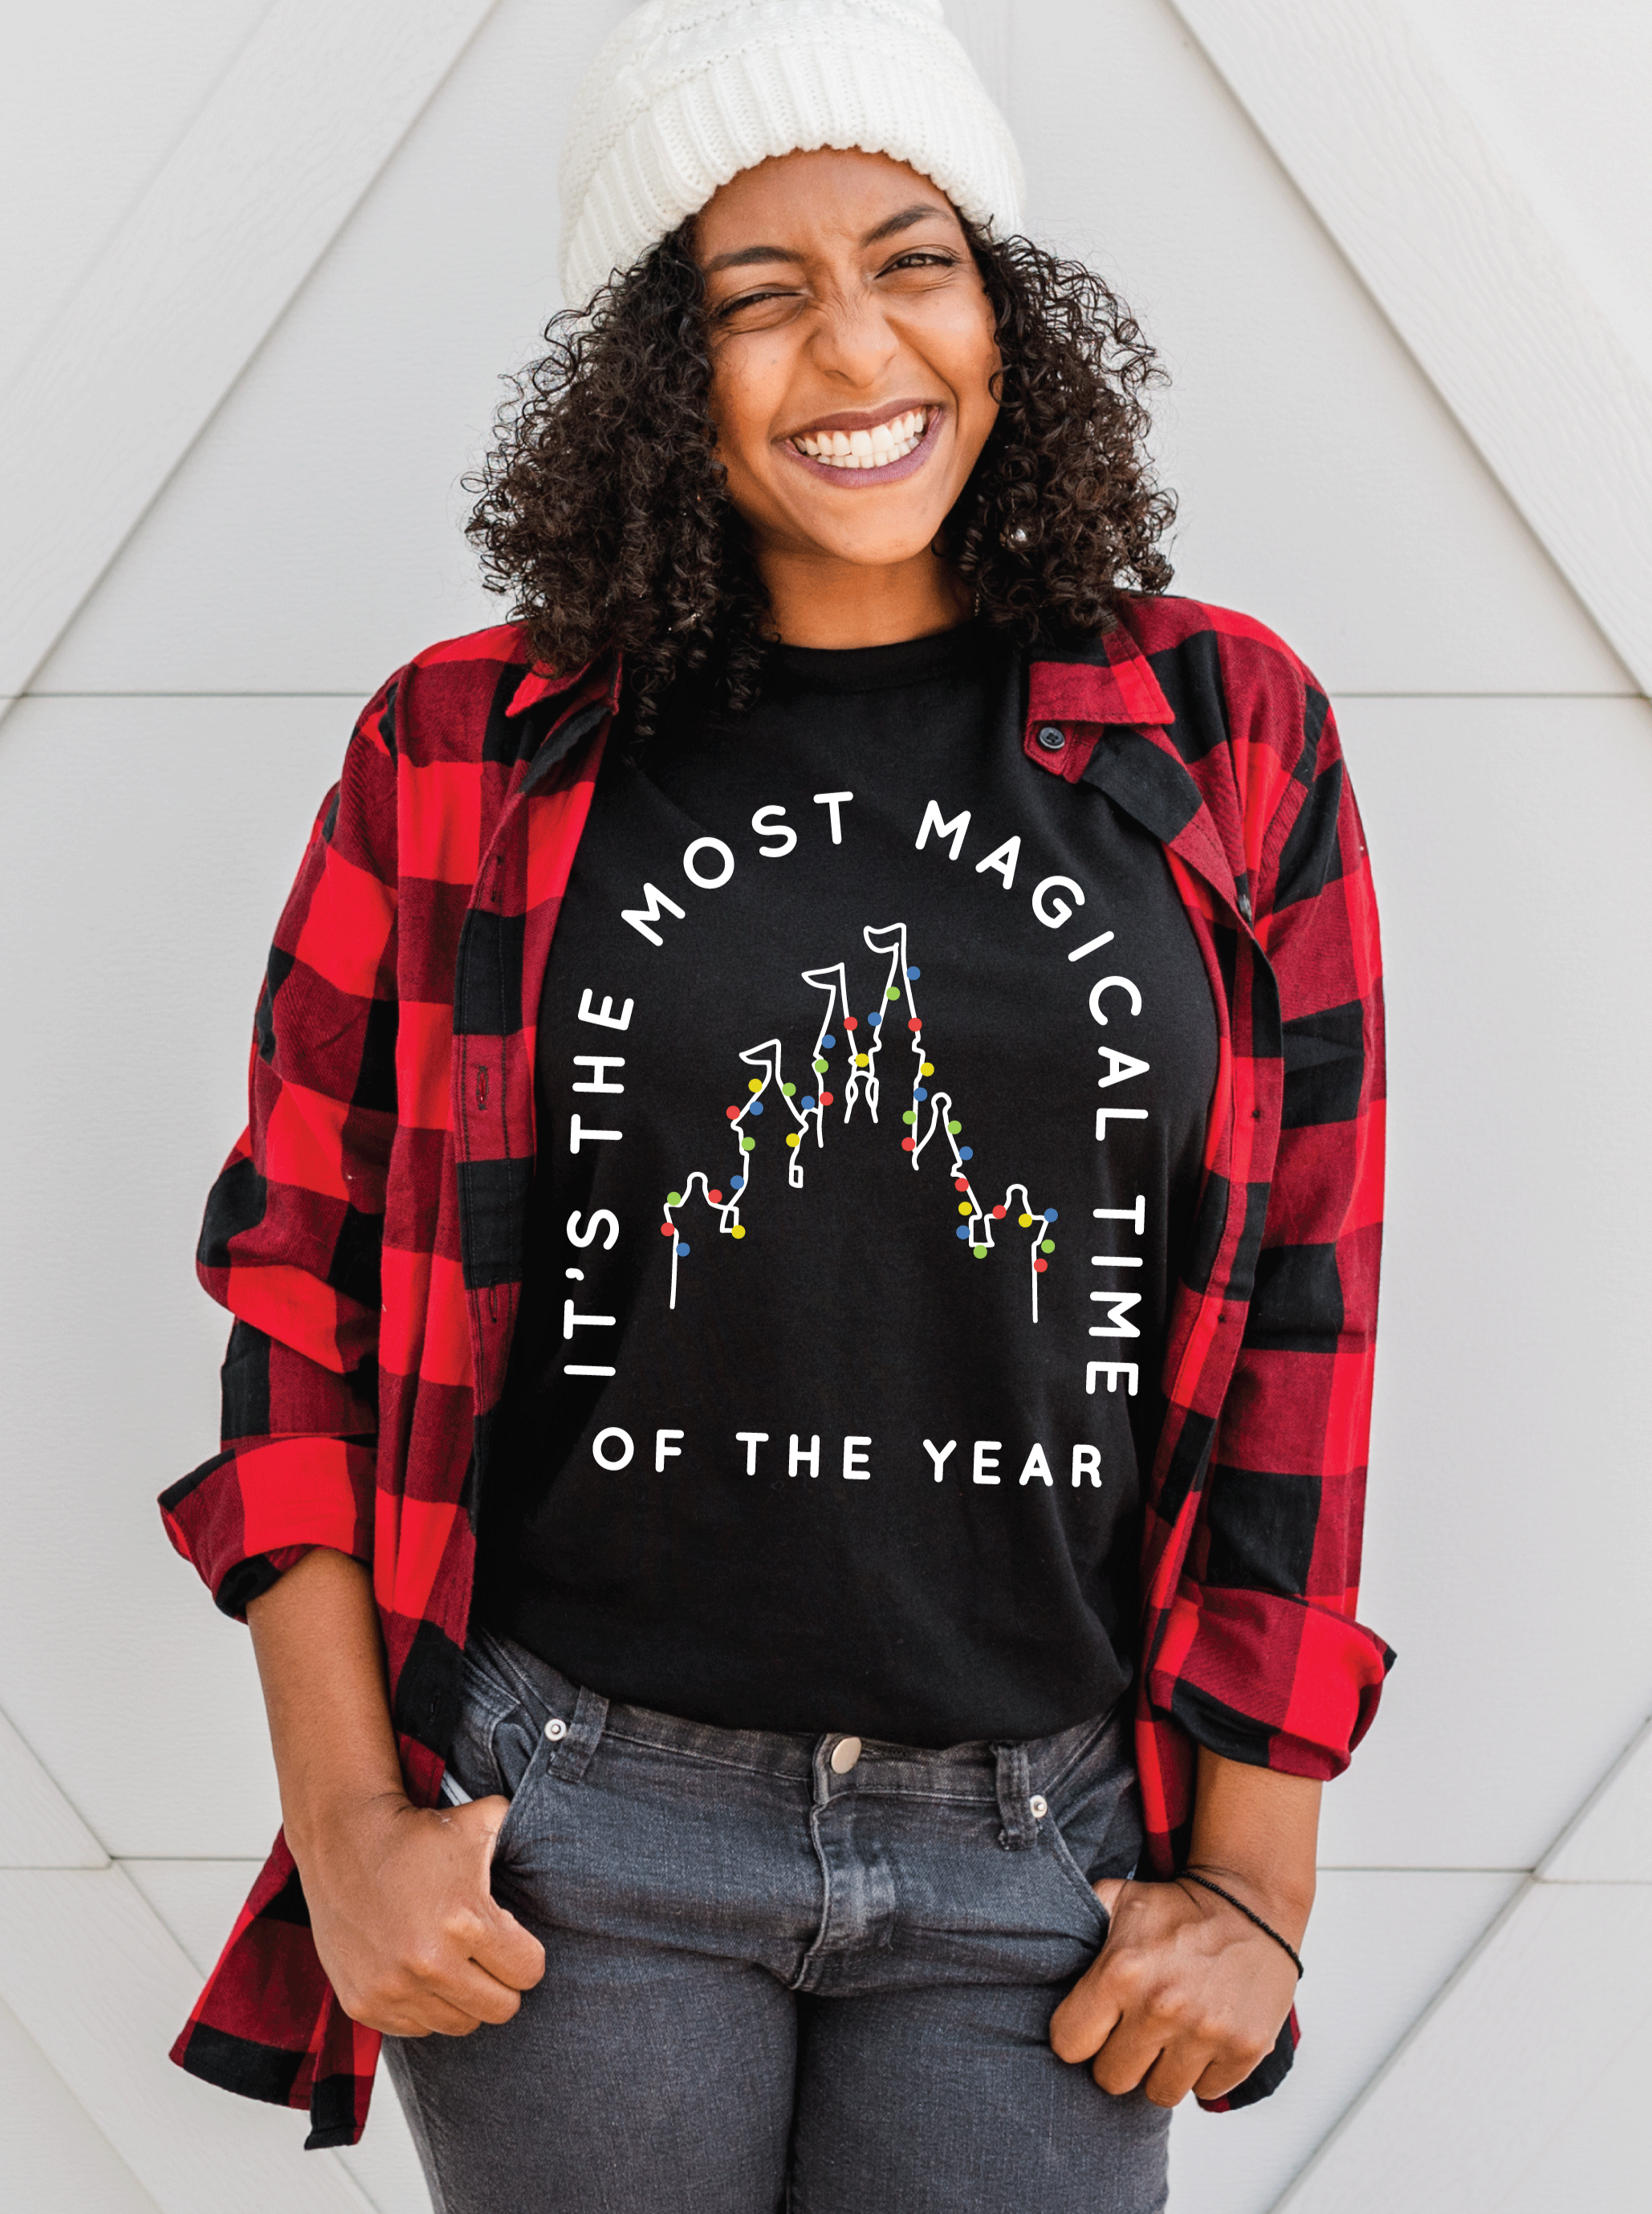 Most Magical Time of the Year || Adult Short Sleeve Tee